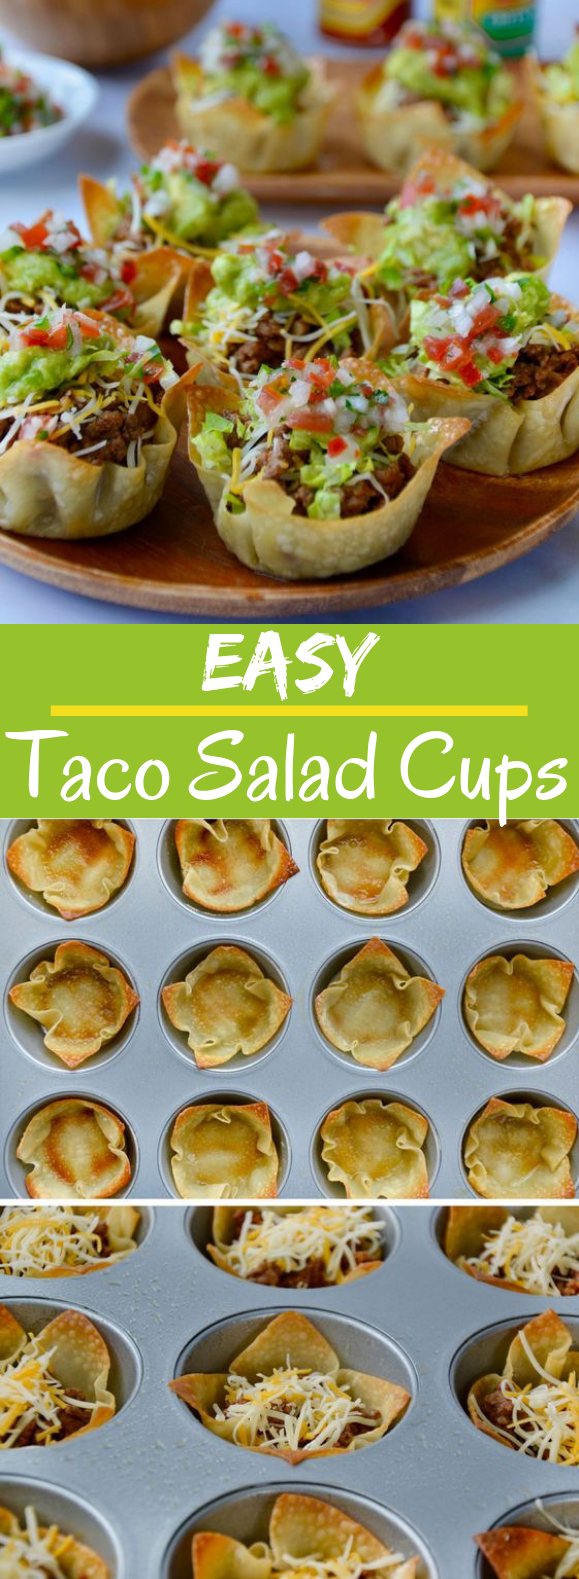 Easy Taco Salad Cups #appetizers #fingerfood